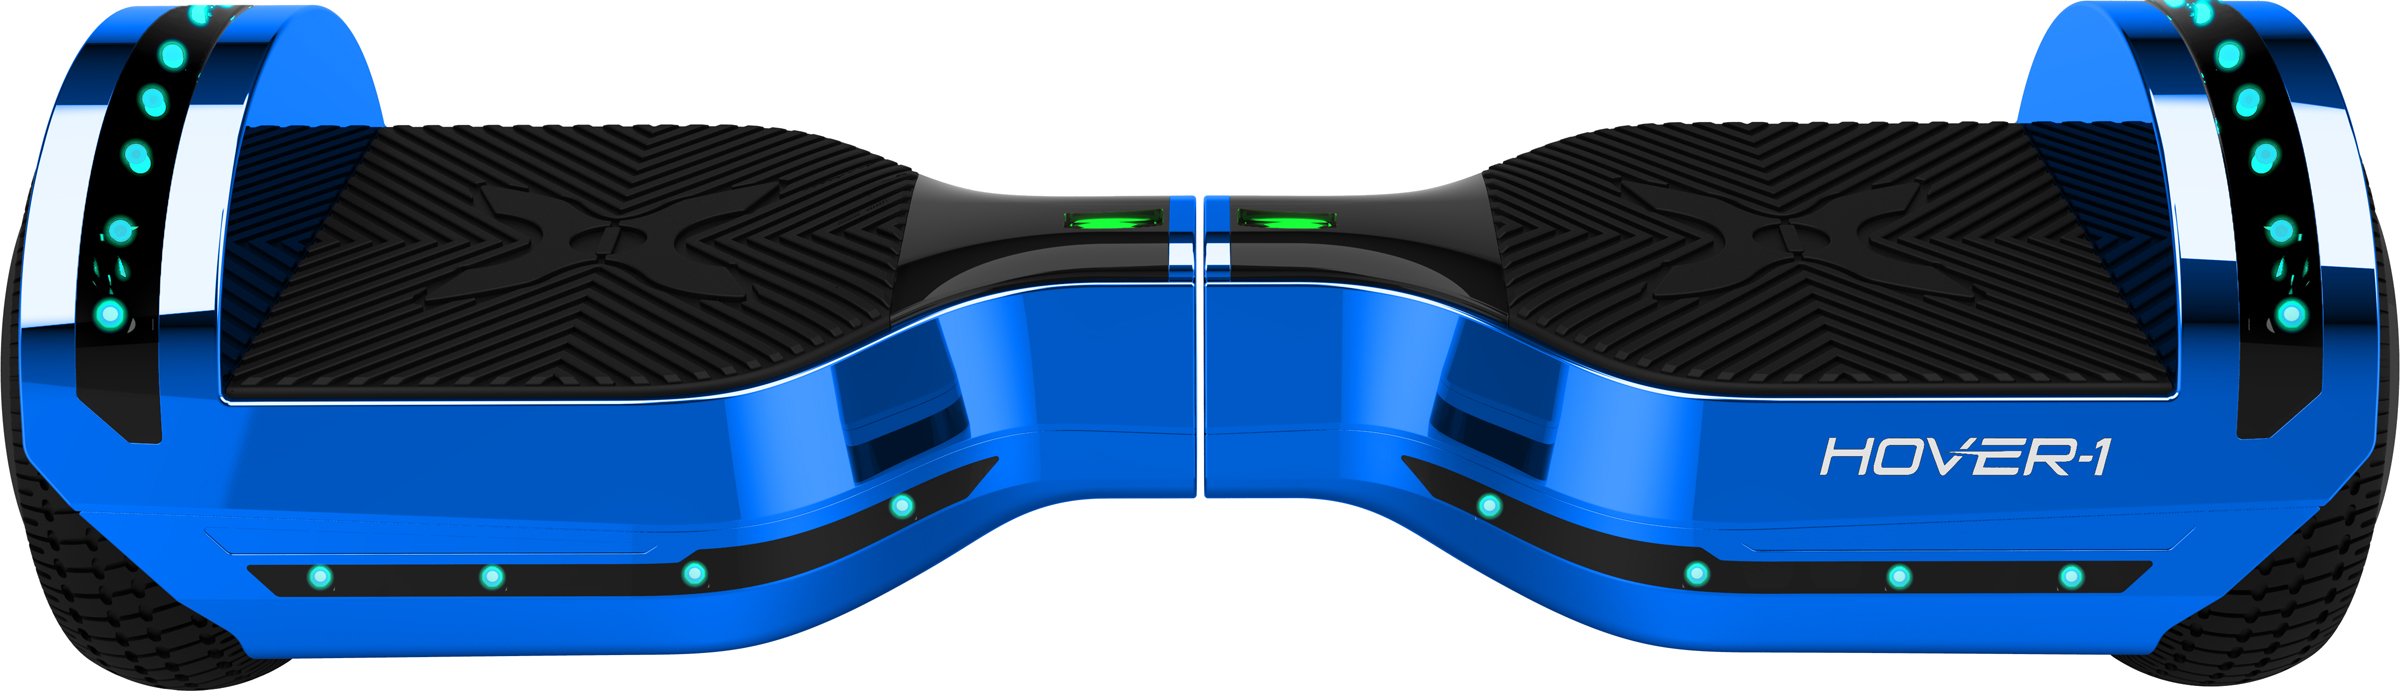 Hover-1 Chrome Hoverboard, LED Lights, Bluetooth Speaker, 6.5 In. Tires, 220 Lbs. Max weight, 7 mph - image 2 of 8